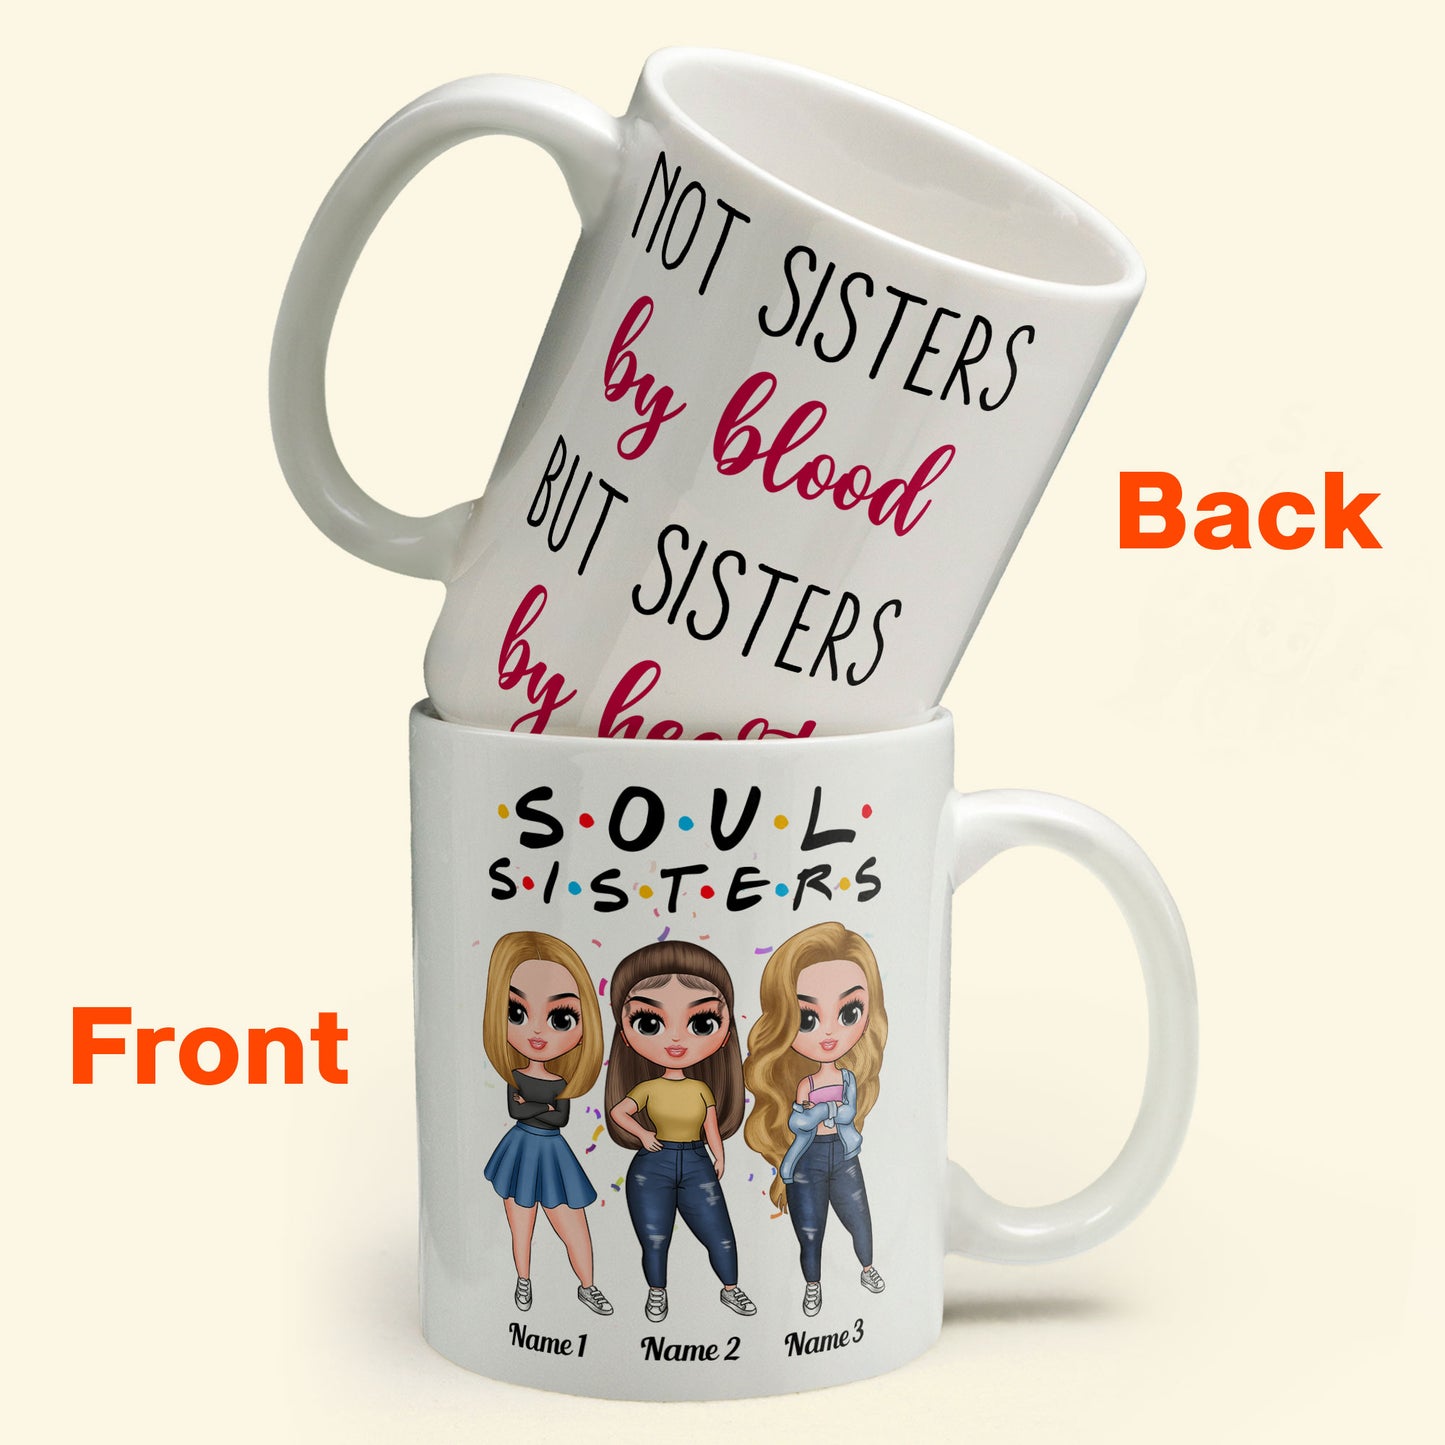 Soul Sisters Not Sisters By Blood But Sisters By Heart - Personalized Mug - Birthday & Christmas Gift For Sister, Soul Sister, Best Friend, BFF, Bestie, Friend